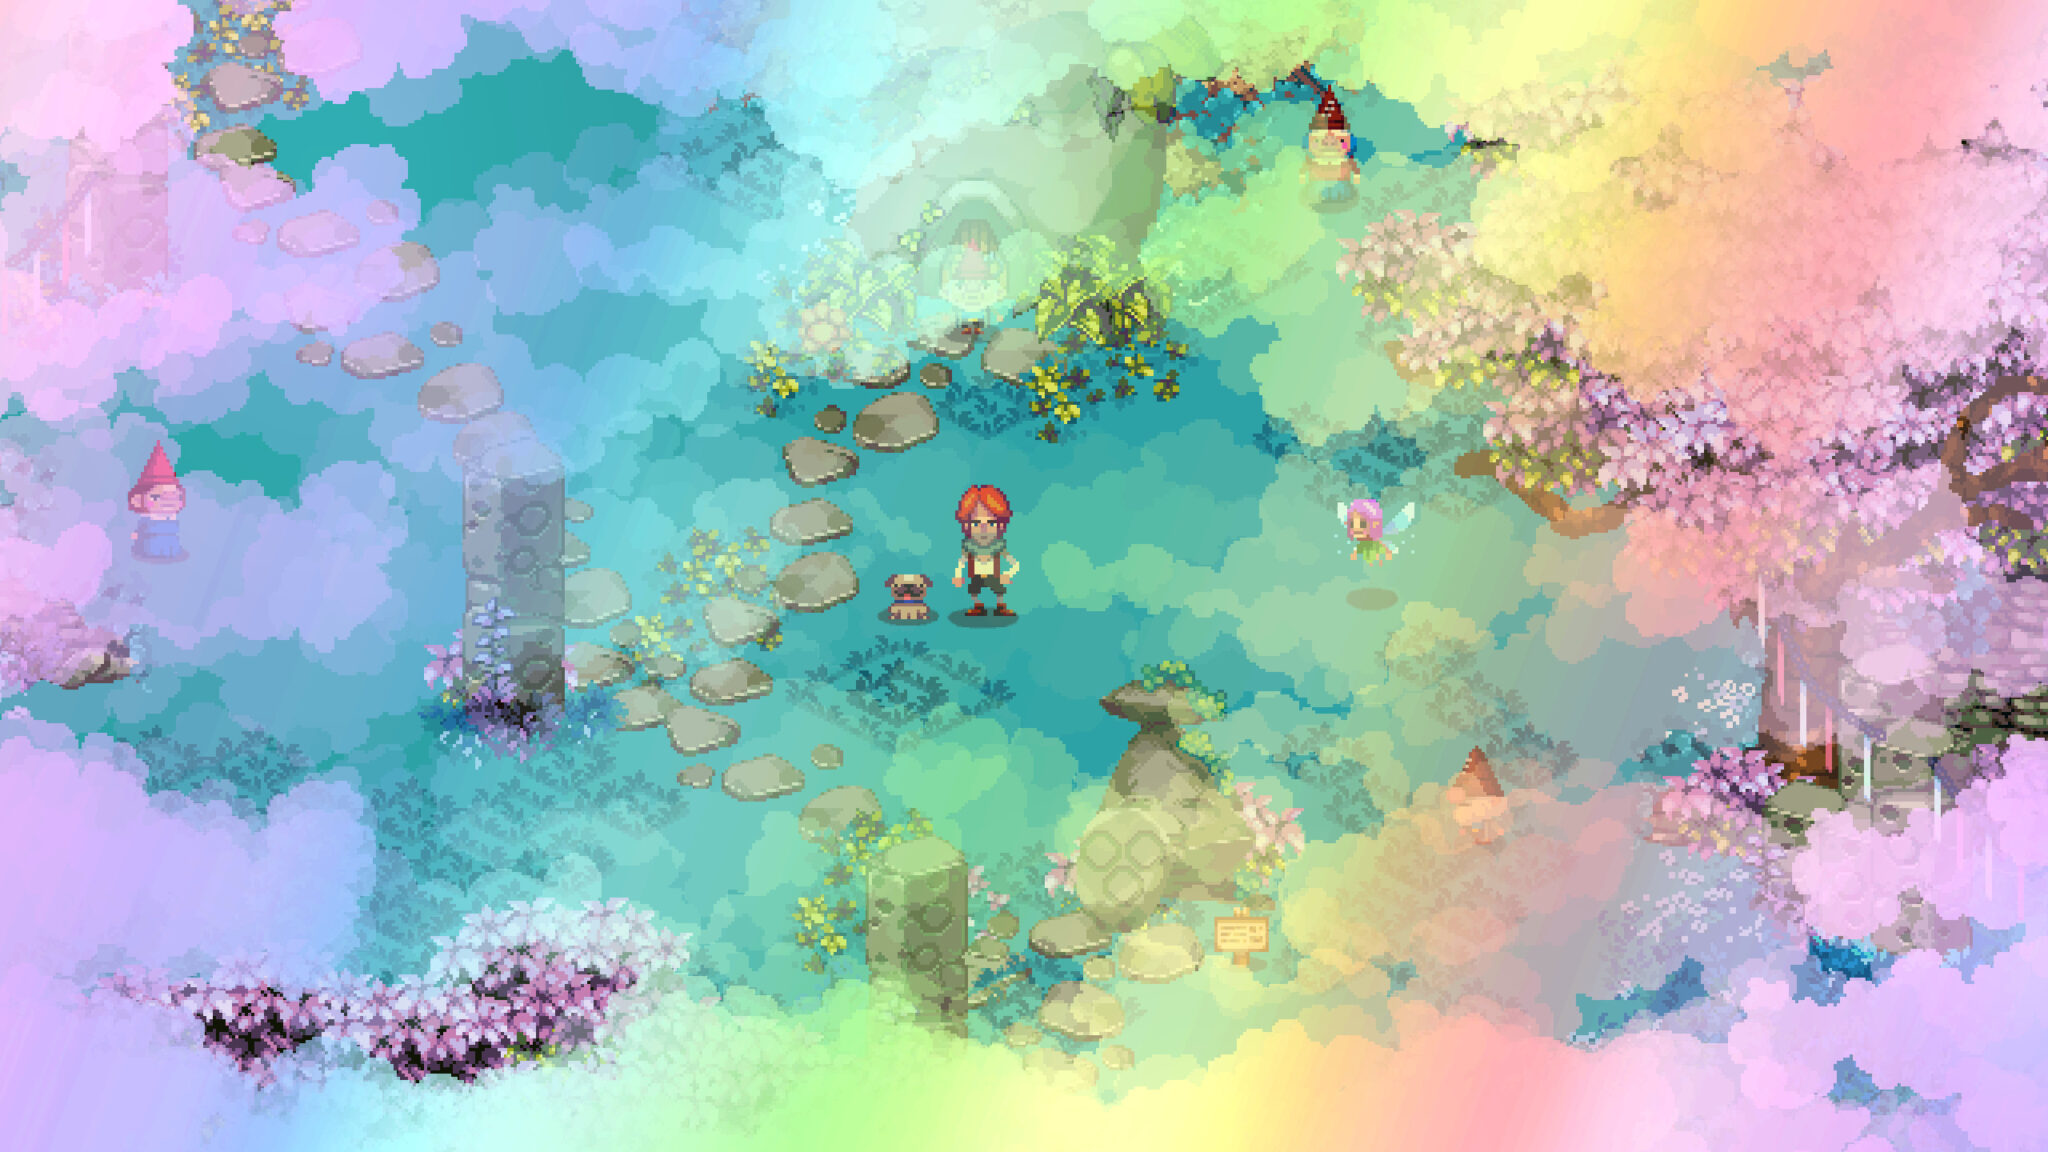 Kynseed screenshot of player character standing in a glade with a pug and fairies and gnomes